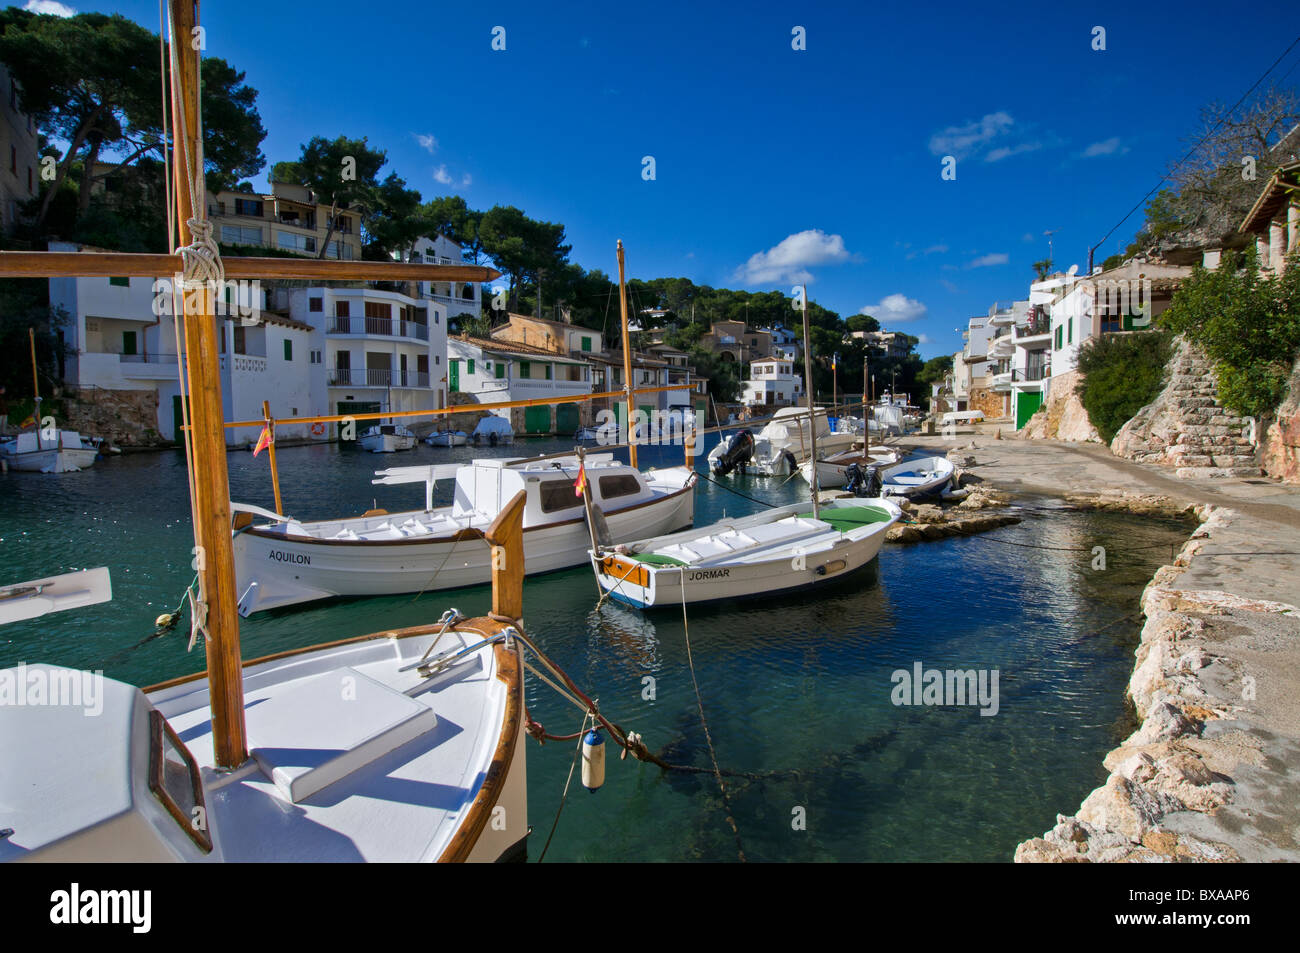 Cala Figuera harbour with fishing boats, Mallorca Balearic Islands Spain Stock Photo